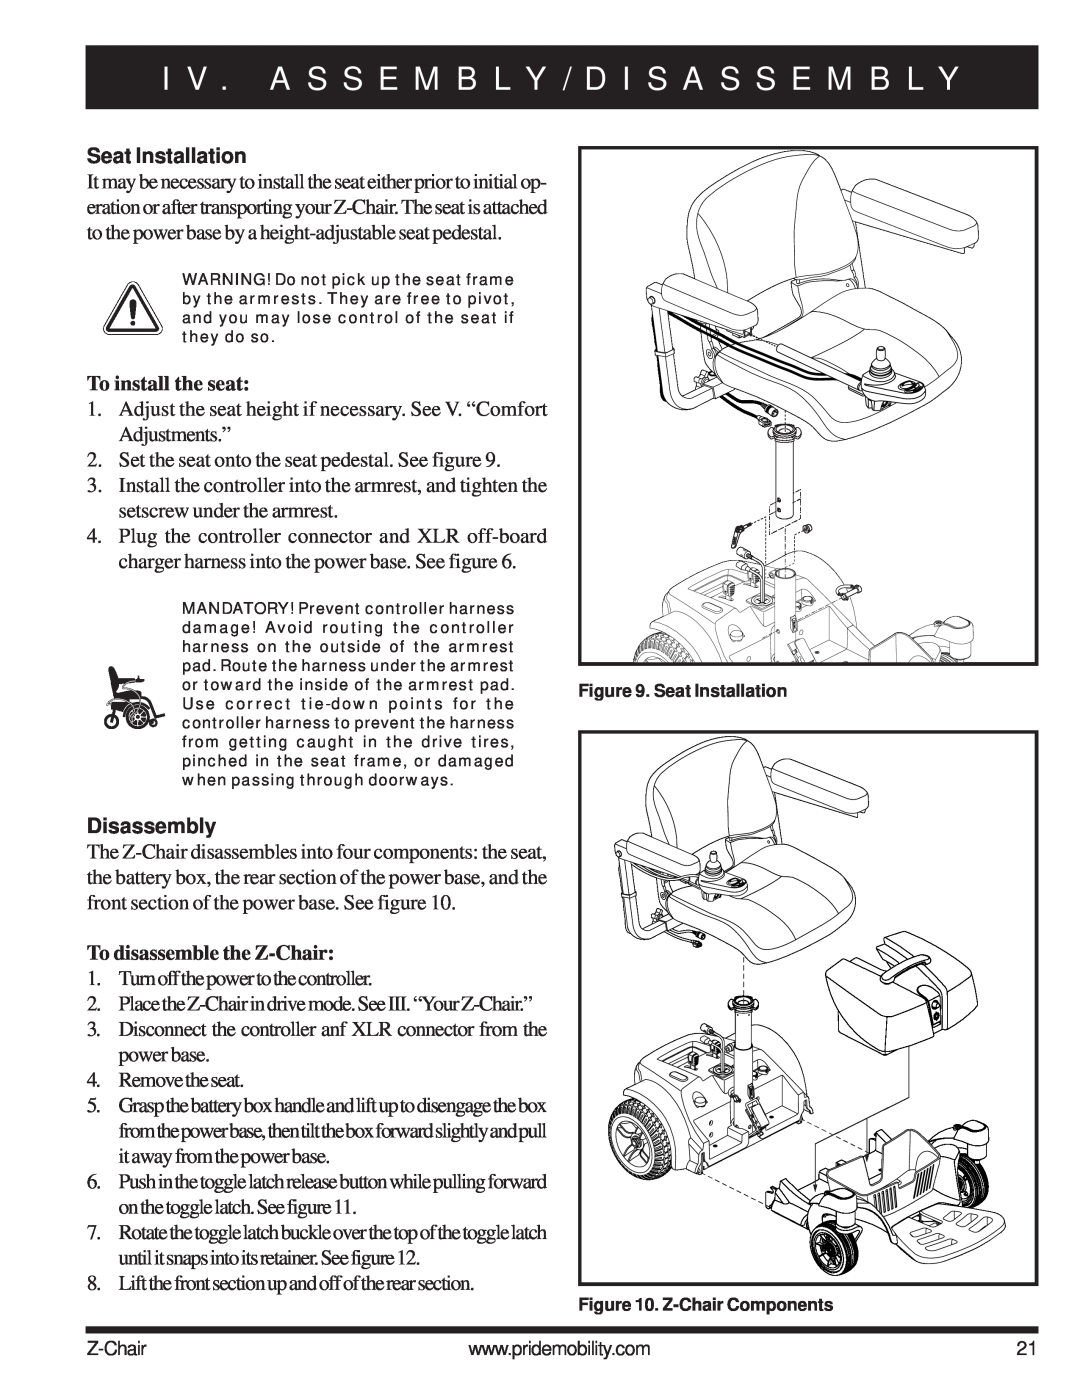 Pride Mobility INFMAN63121 manual Seat Installation, To install the seat, Disassembly, To disassemble the Z-Chair 